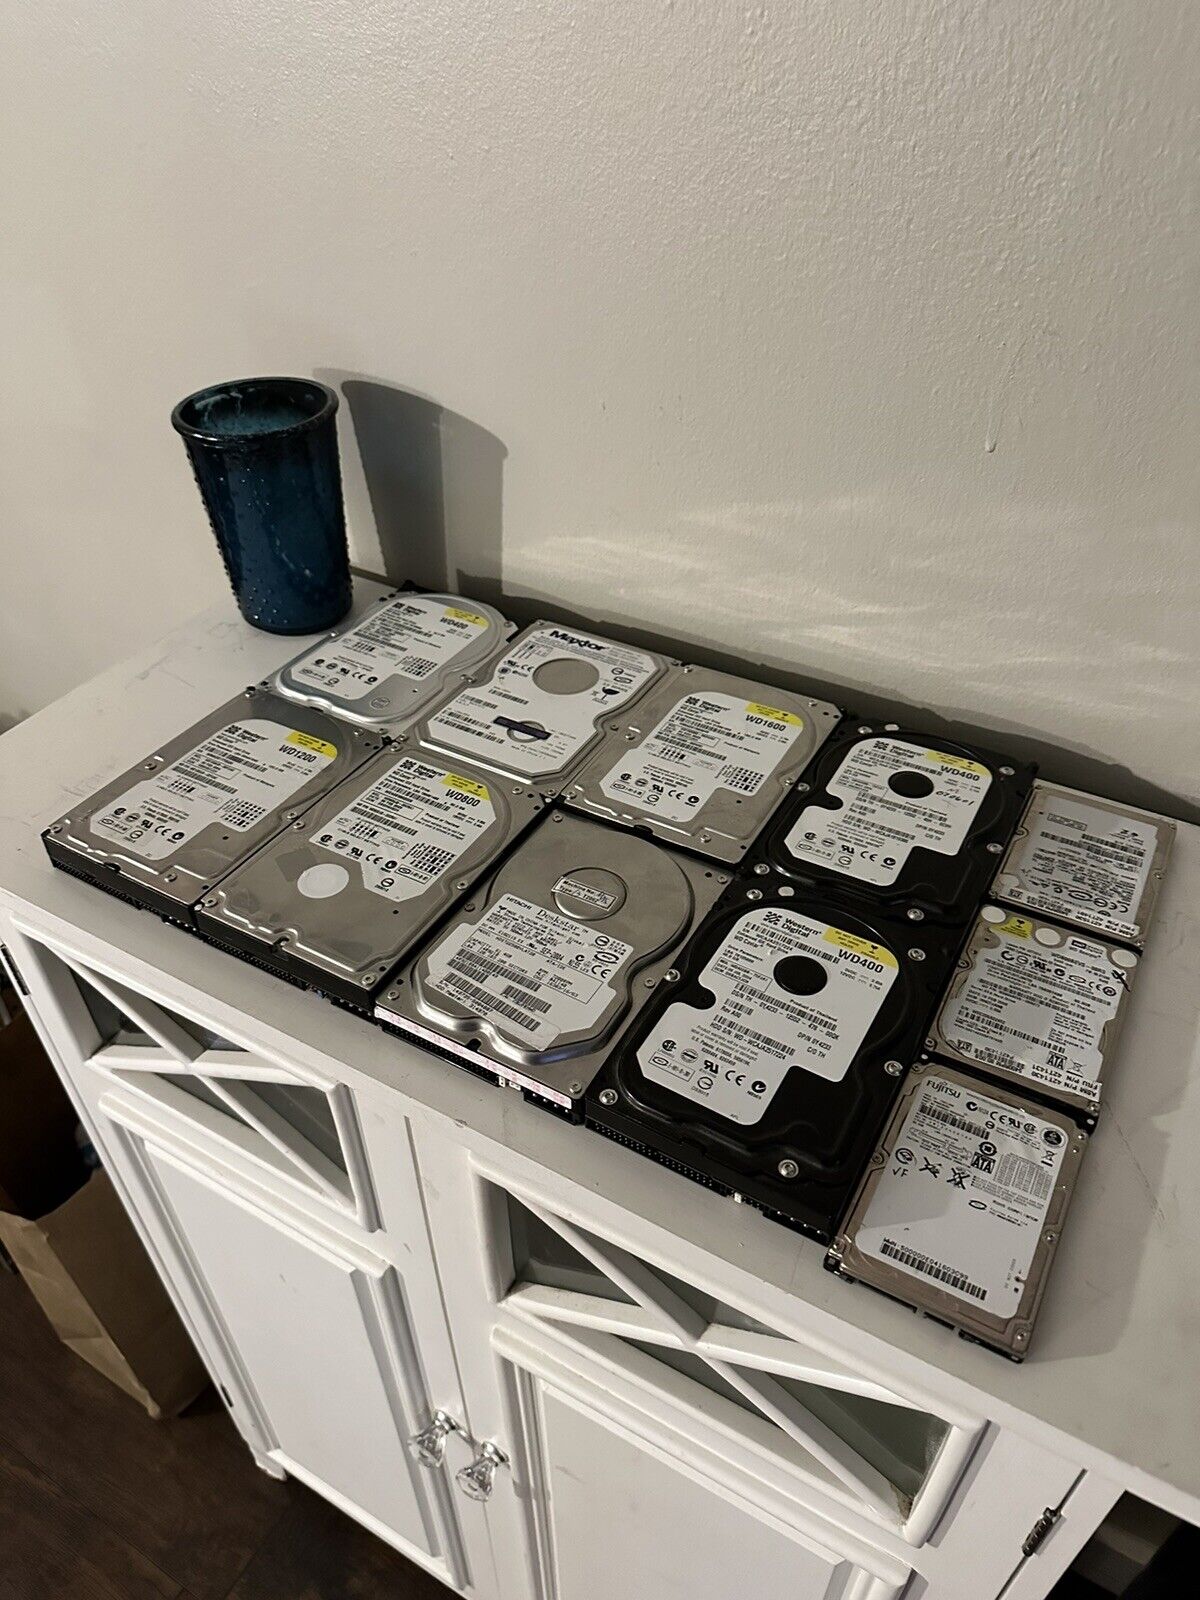 Mixed Lot of 11 Used Working Laptop & Desktop Hard Drives From Old Computers